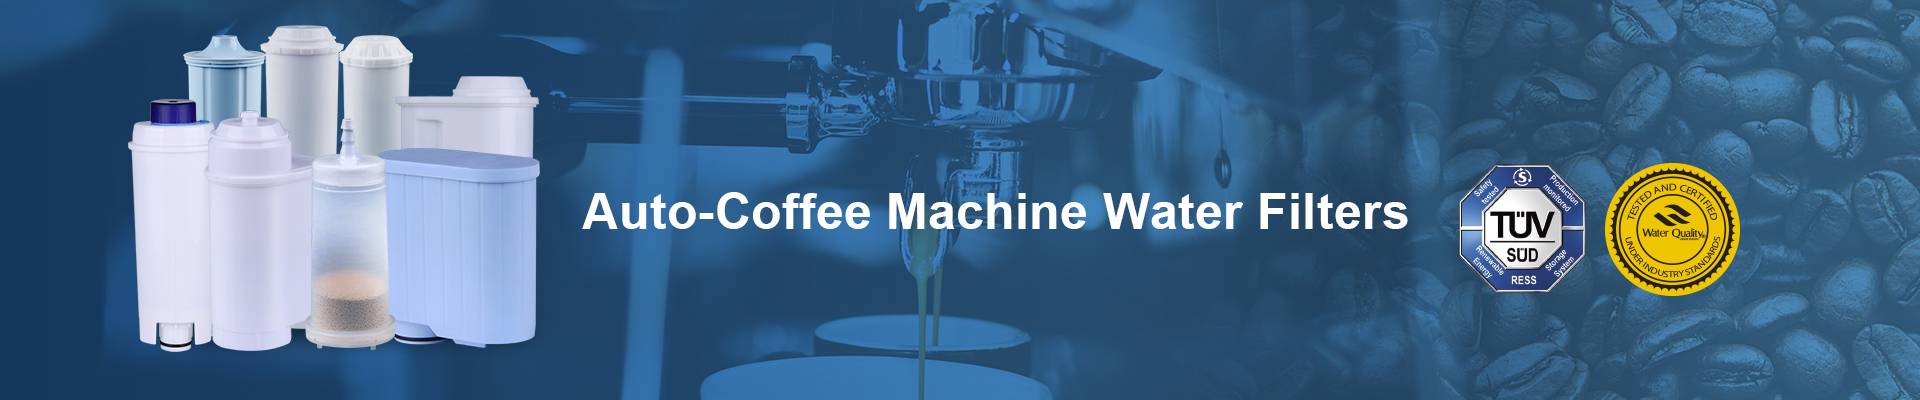 Auto-Coffee Machine Water Filters